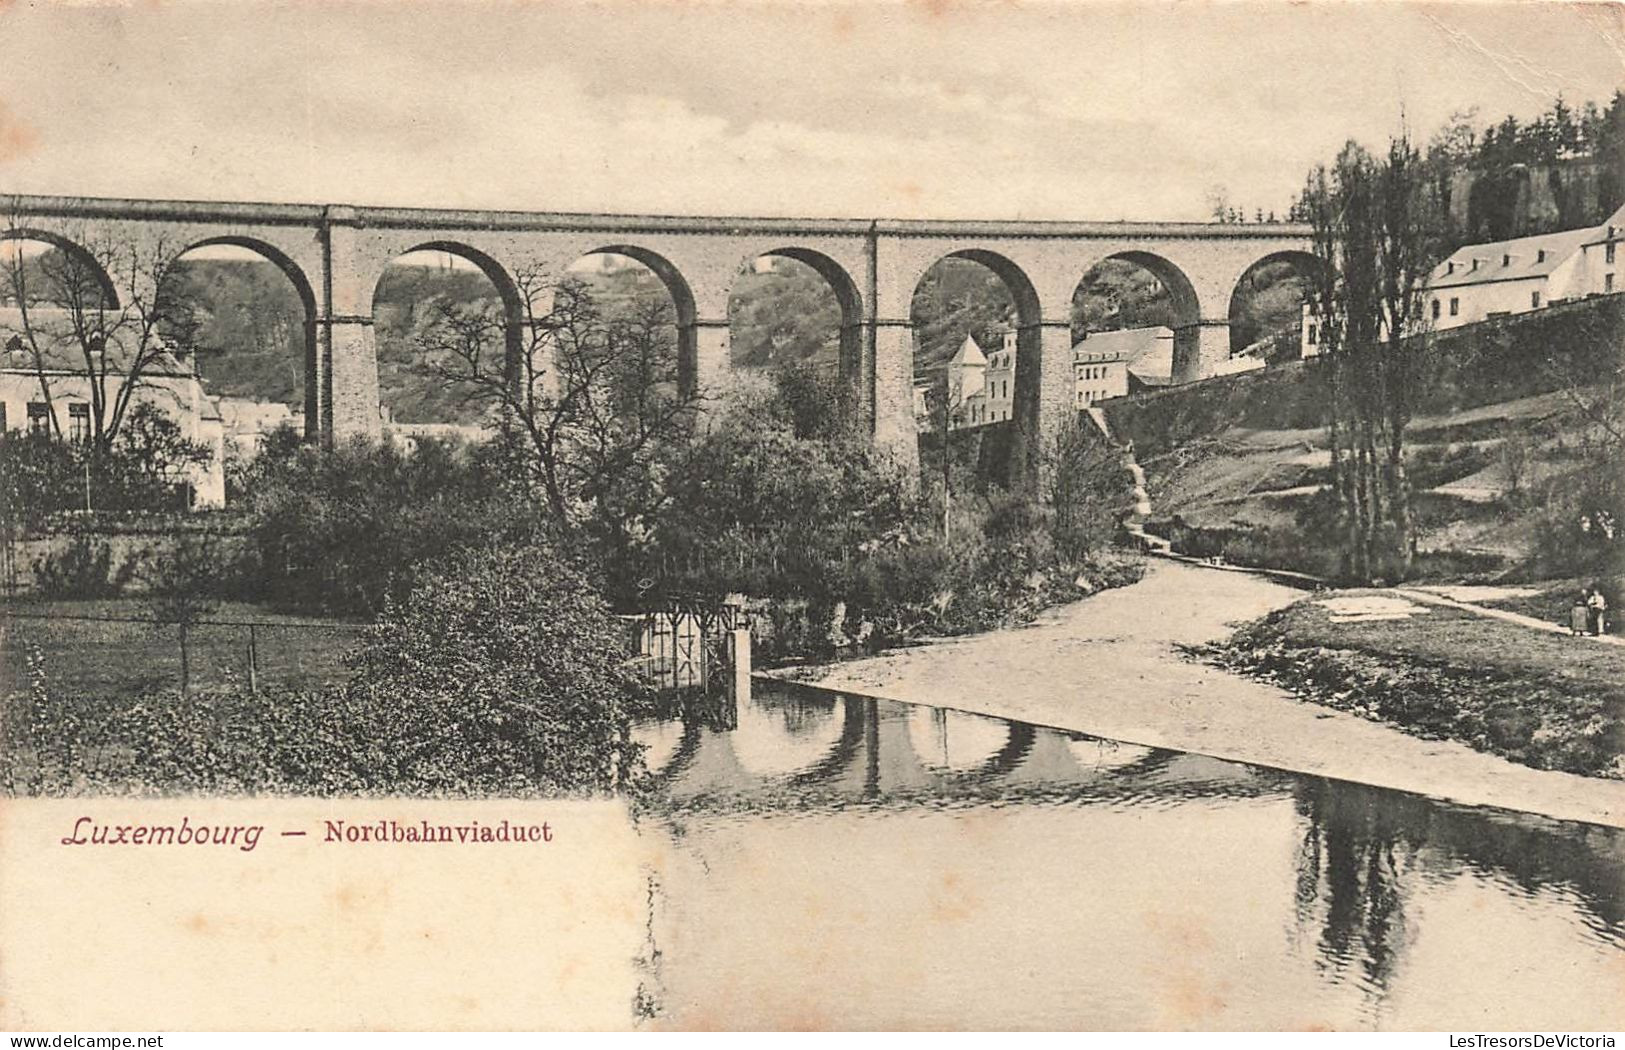 LUXEMBOURG - Nordbahnviaduct - Carte Postale Ancienne - Luxemburg - Stad